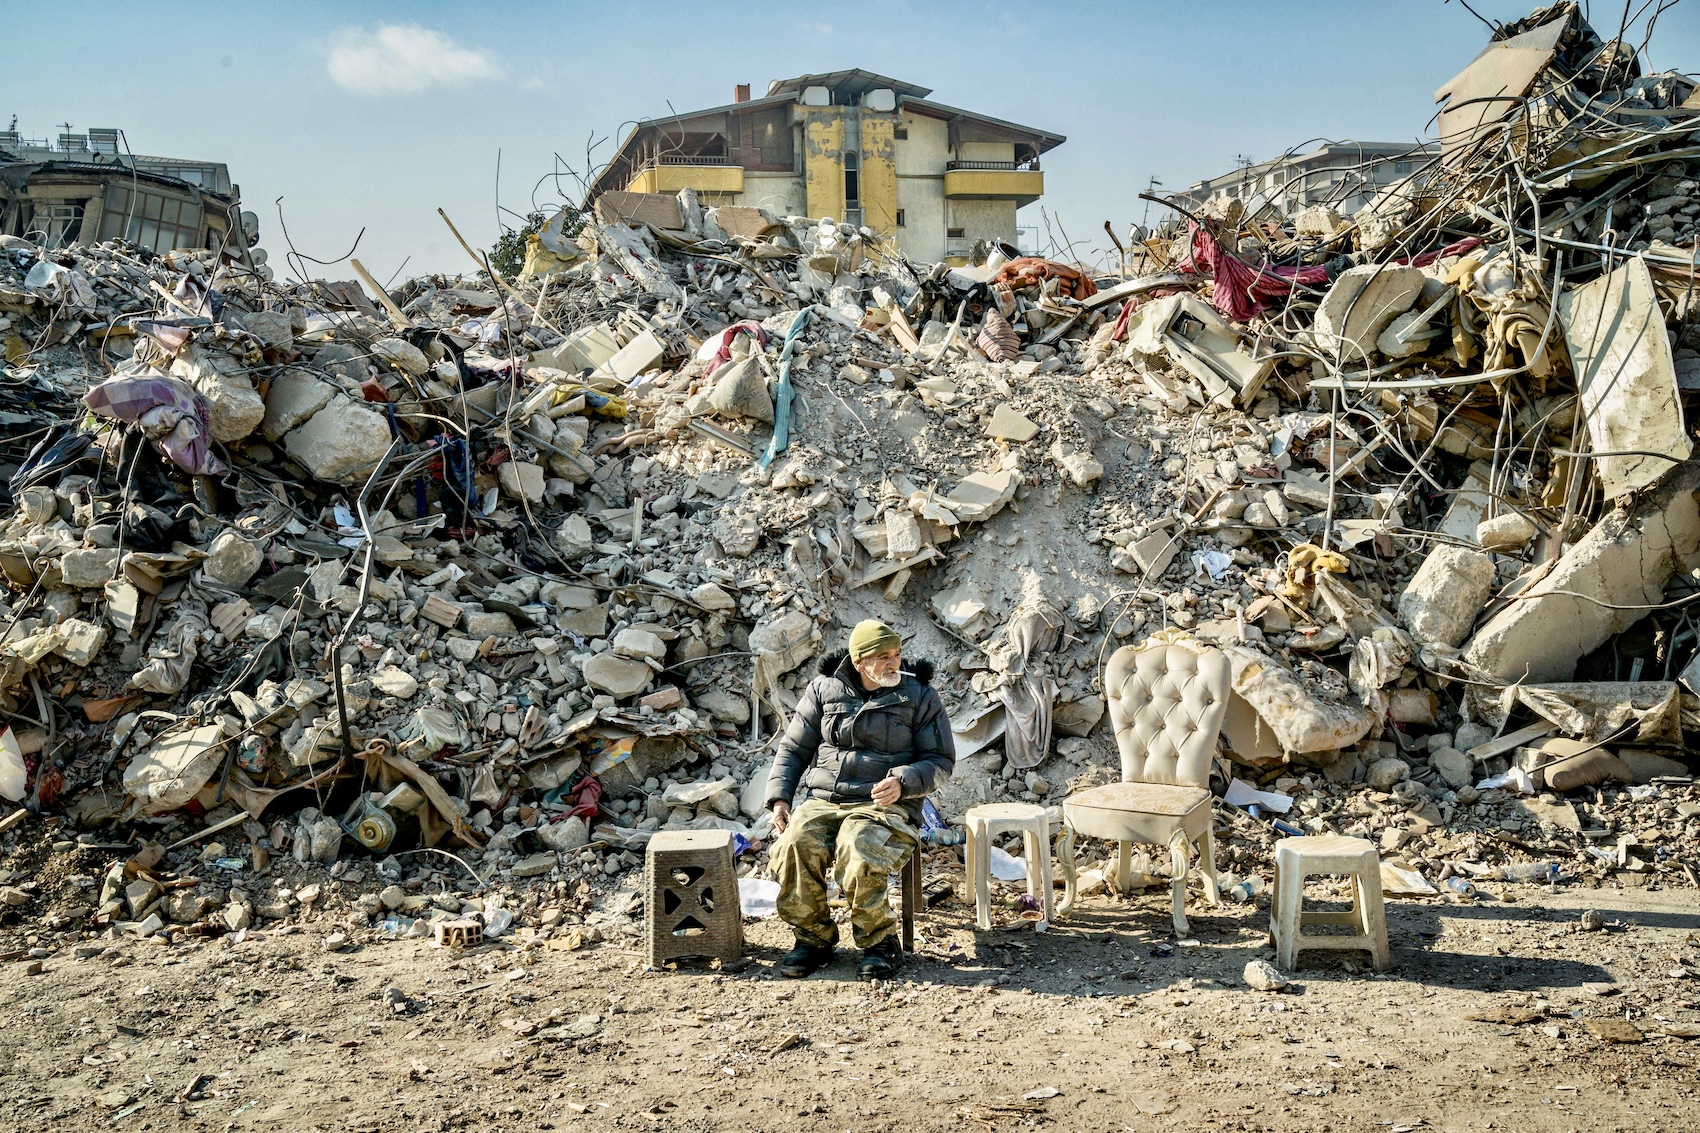 A man guards the ruins of the destroyed buildings in Antakya after the massive earthquake